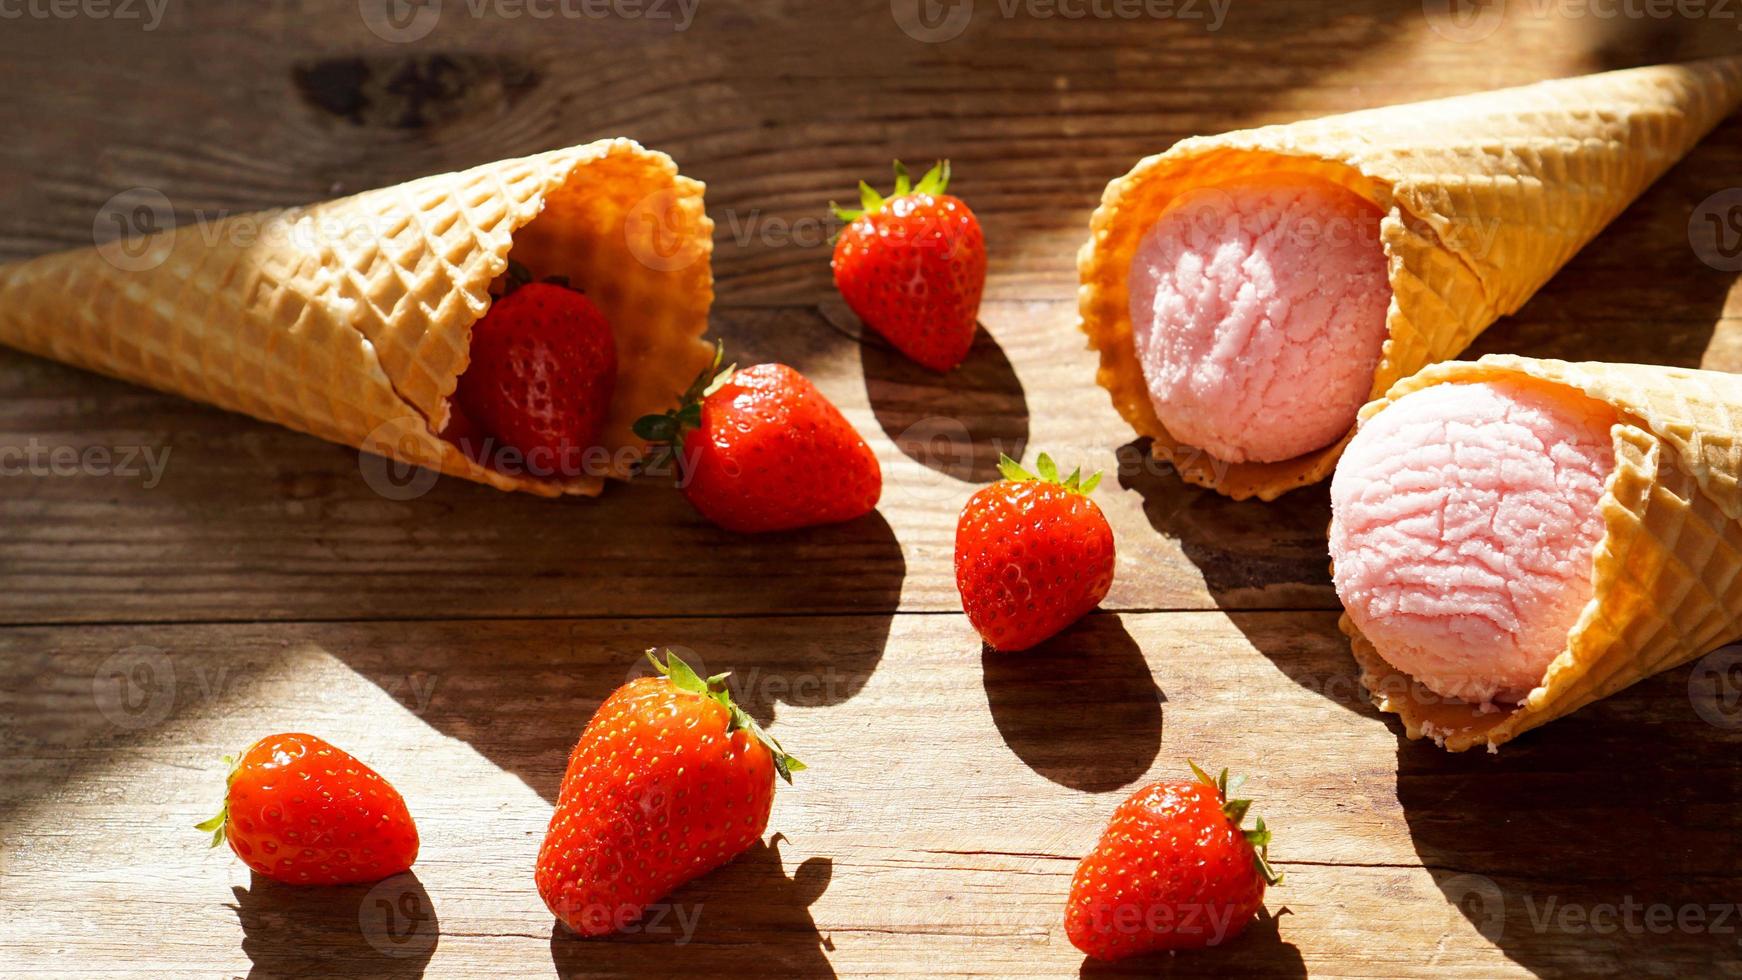 Strawberry ice cream in a waffle cone. Red berries and ice cream balls photo